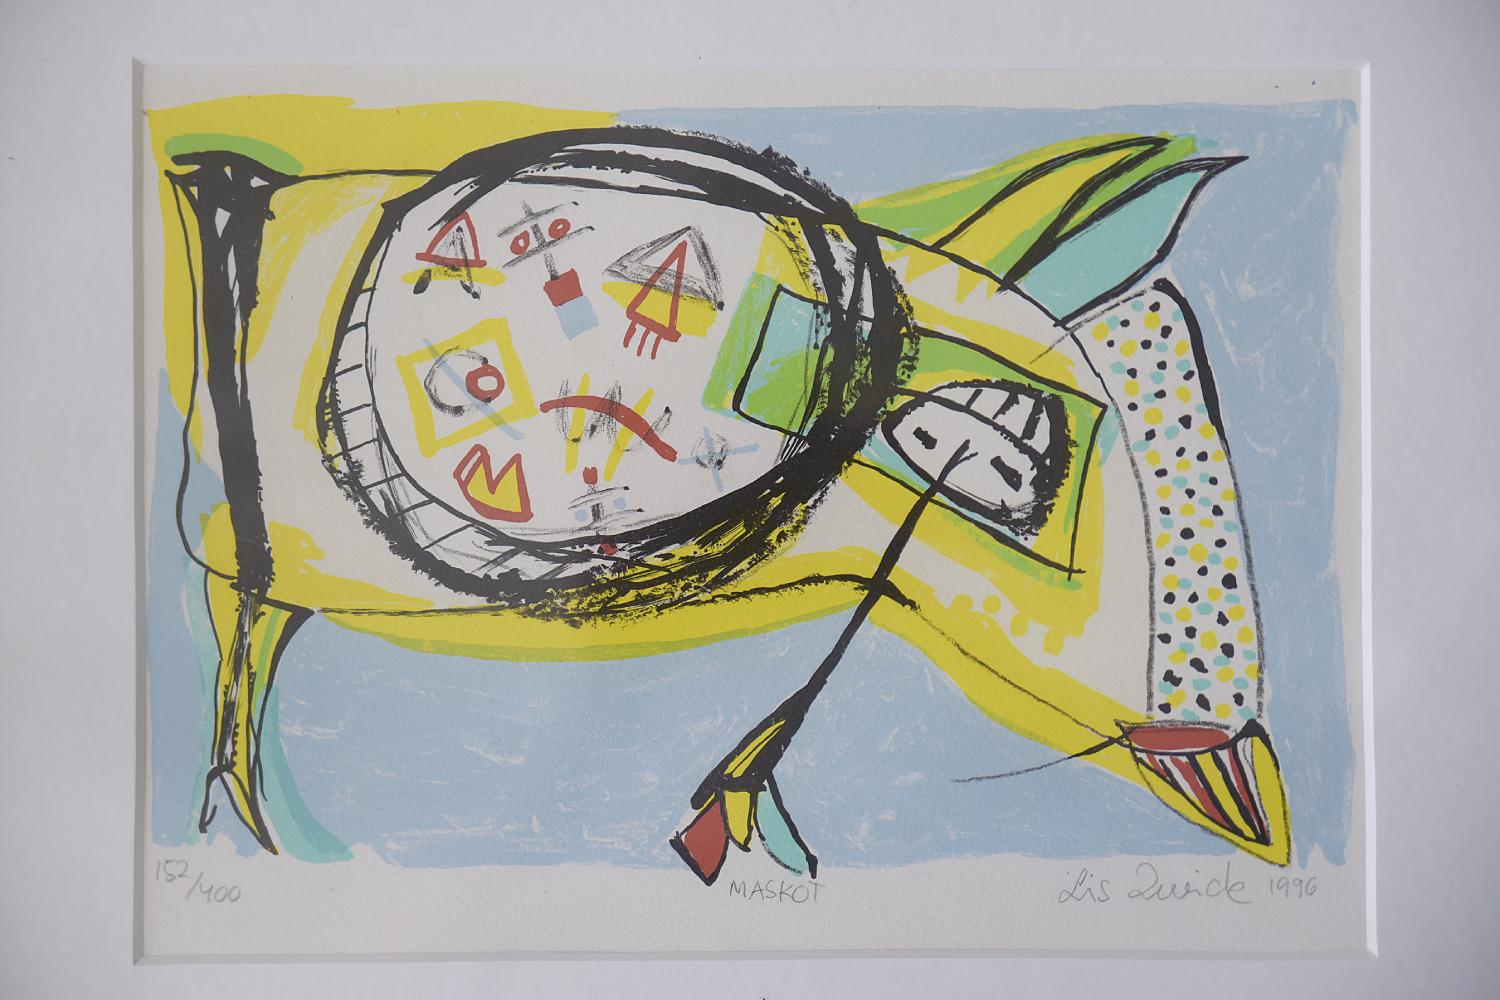 Scandinavian Modern Original Vintage Abstract Color Lithograph, Maskot by Lis Zwick, 1996 For Sale